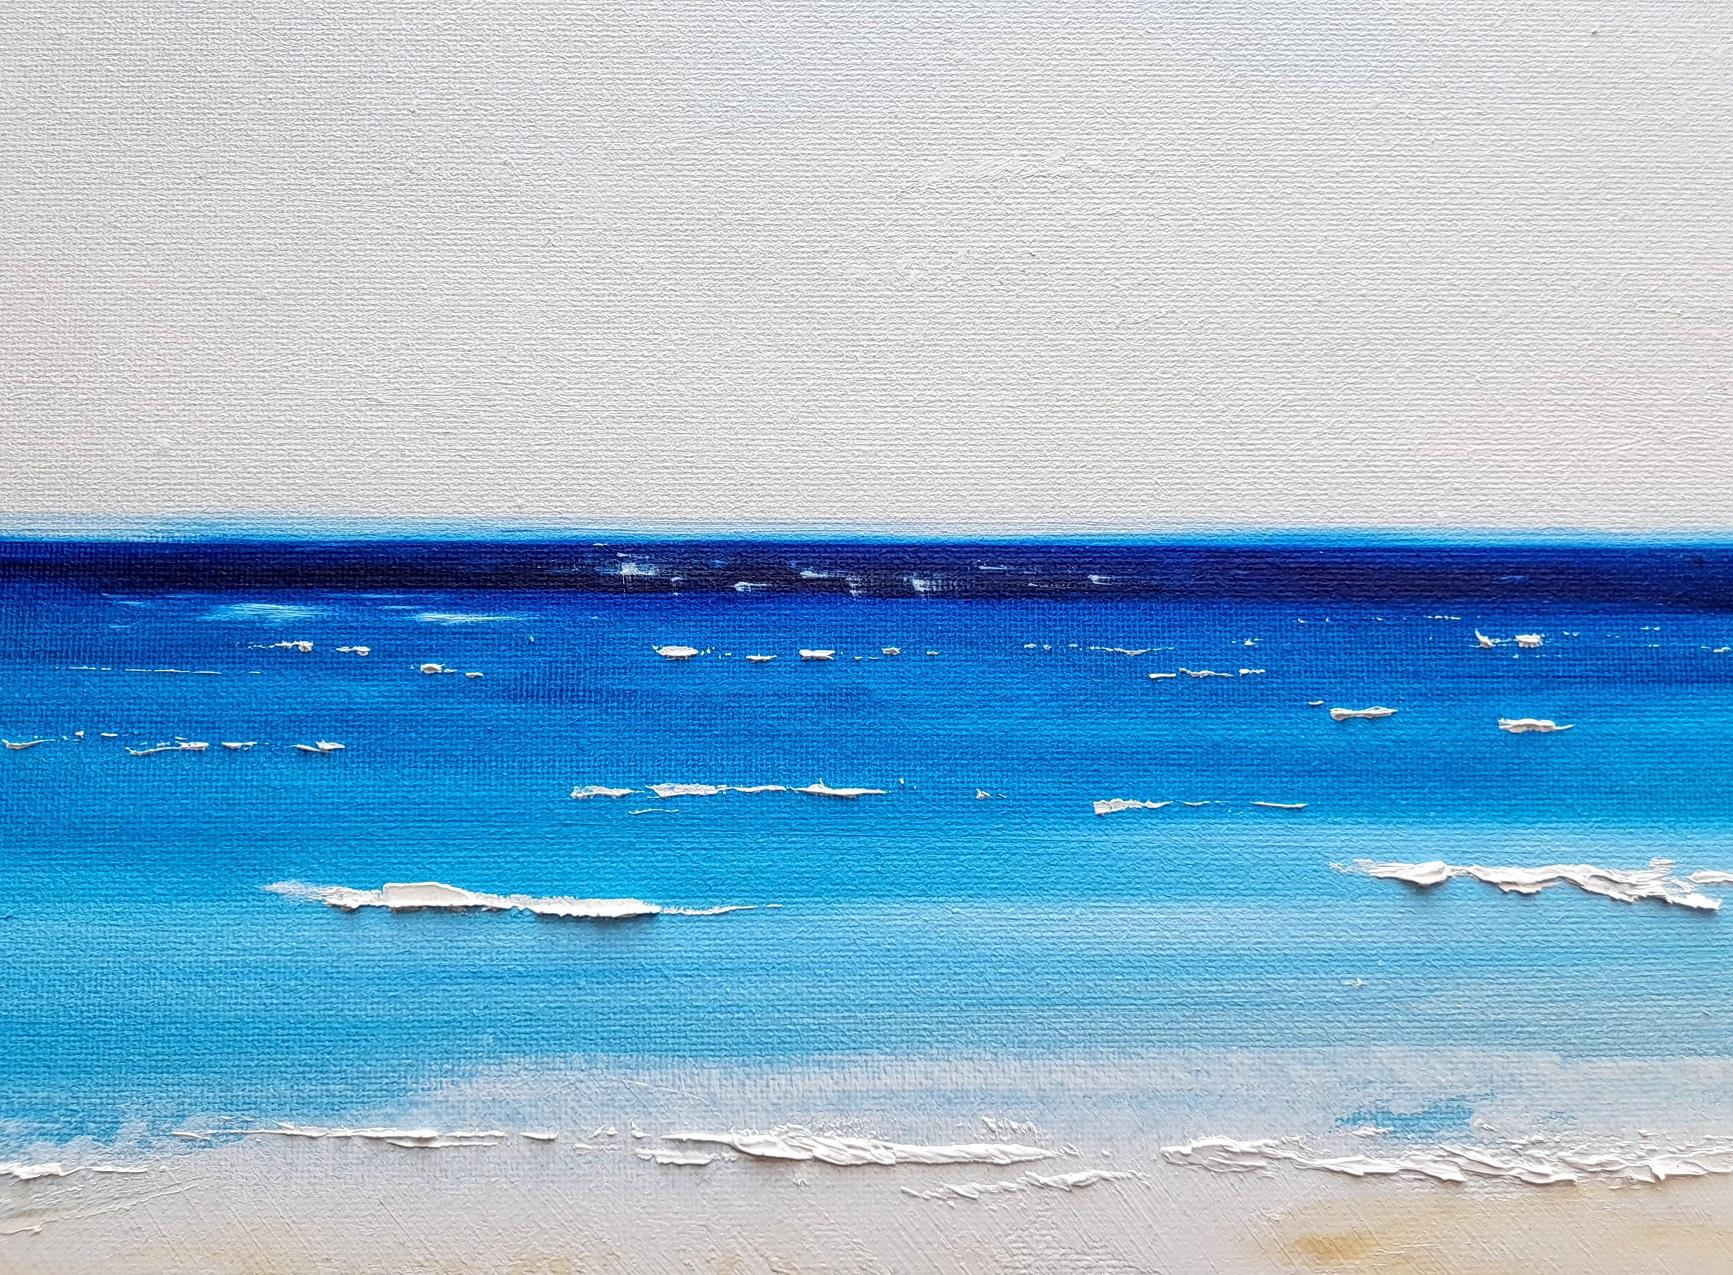 'Refreshing Days at the Beach' by Georgie Dowling [2023]
original
Oil paint on canvas
Image size: H:40 cm x W:80 cm
Complete Size of Unframed Work: H:40 cm x W:80 cm x D:2cm
Sold Unframed
Please note that insitu images are purely an indication of